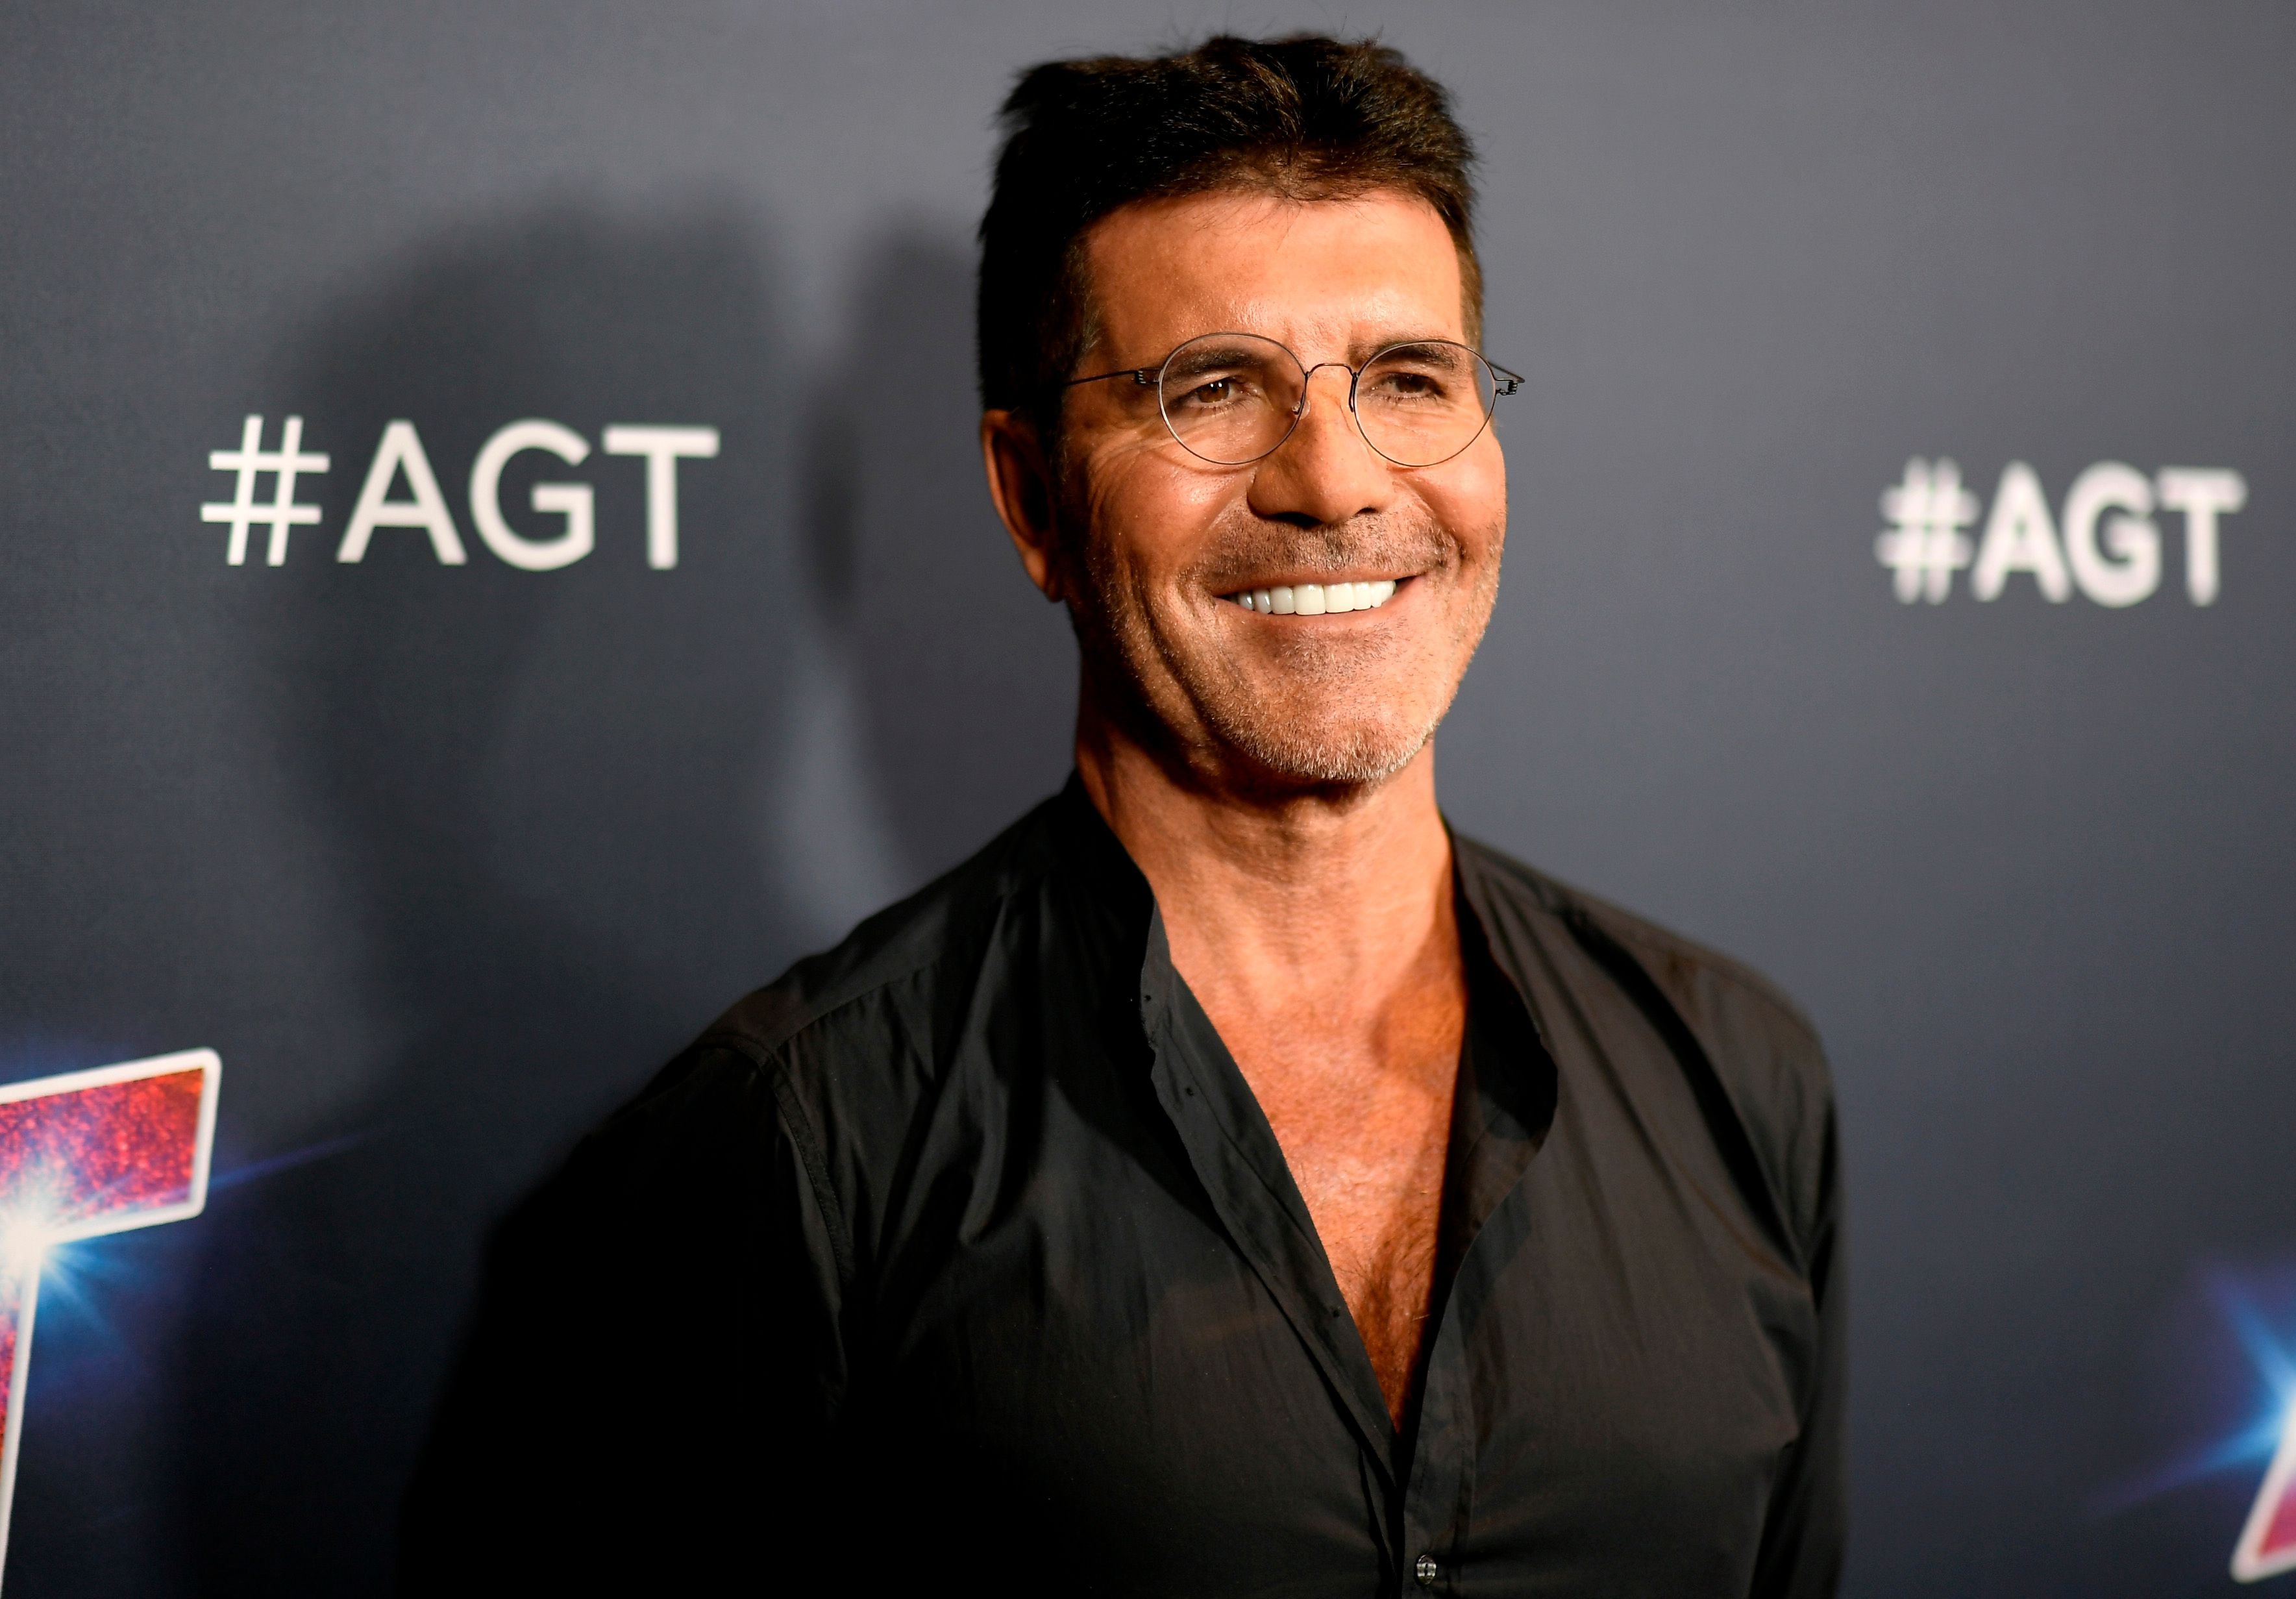 Simon Cowell at "America's Got Talent" season 14 live show red carpet on September 17, 2019, in Hollywood, California | Photo: Getty Images